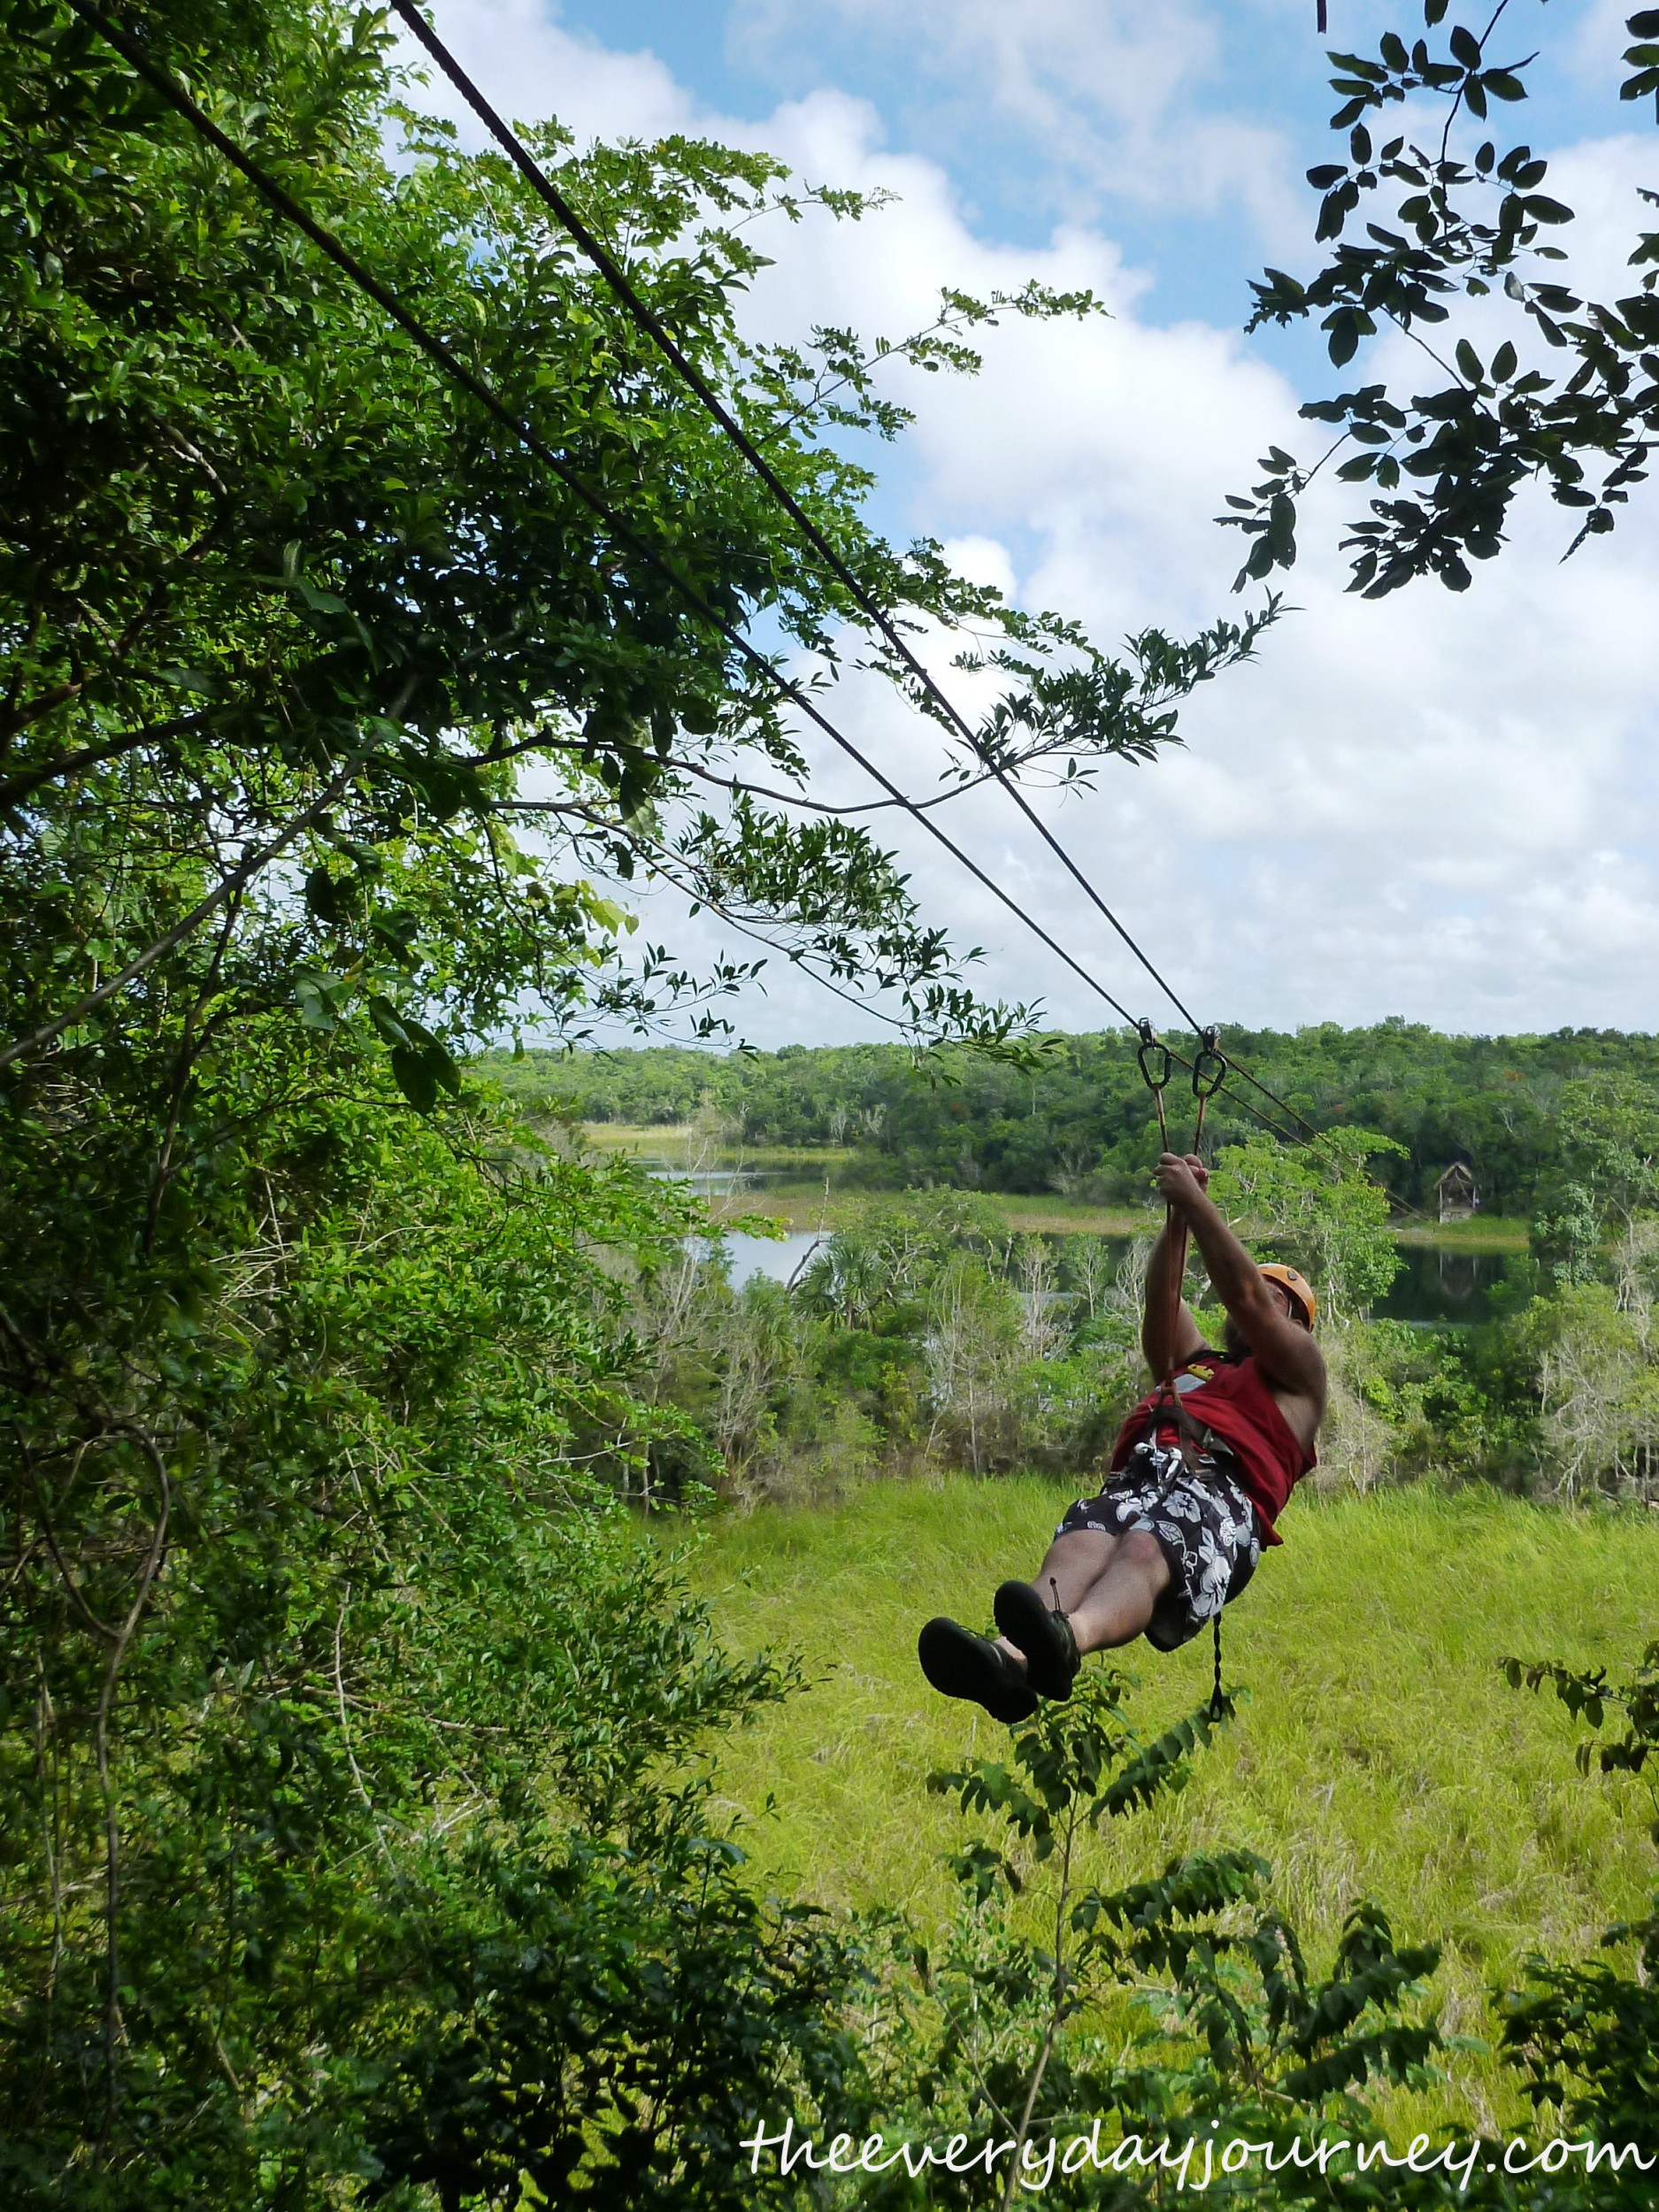 Jason was first in line for zip-lining-he has no fear!